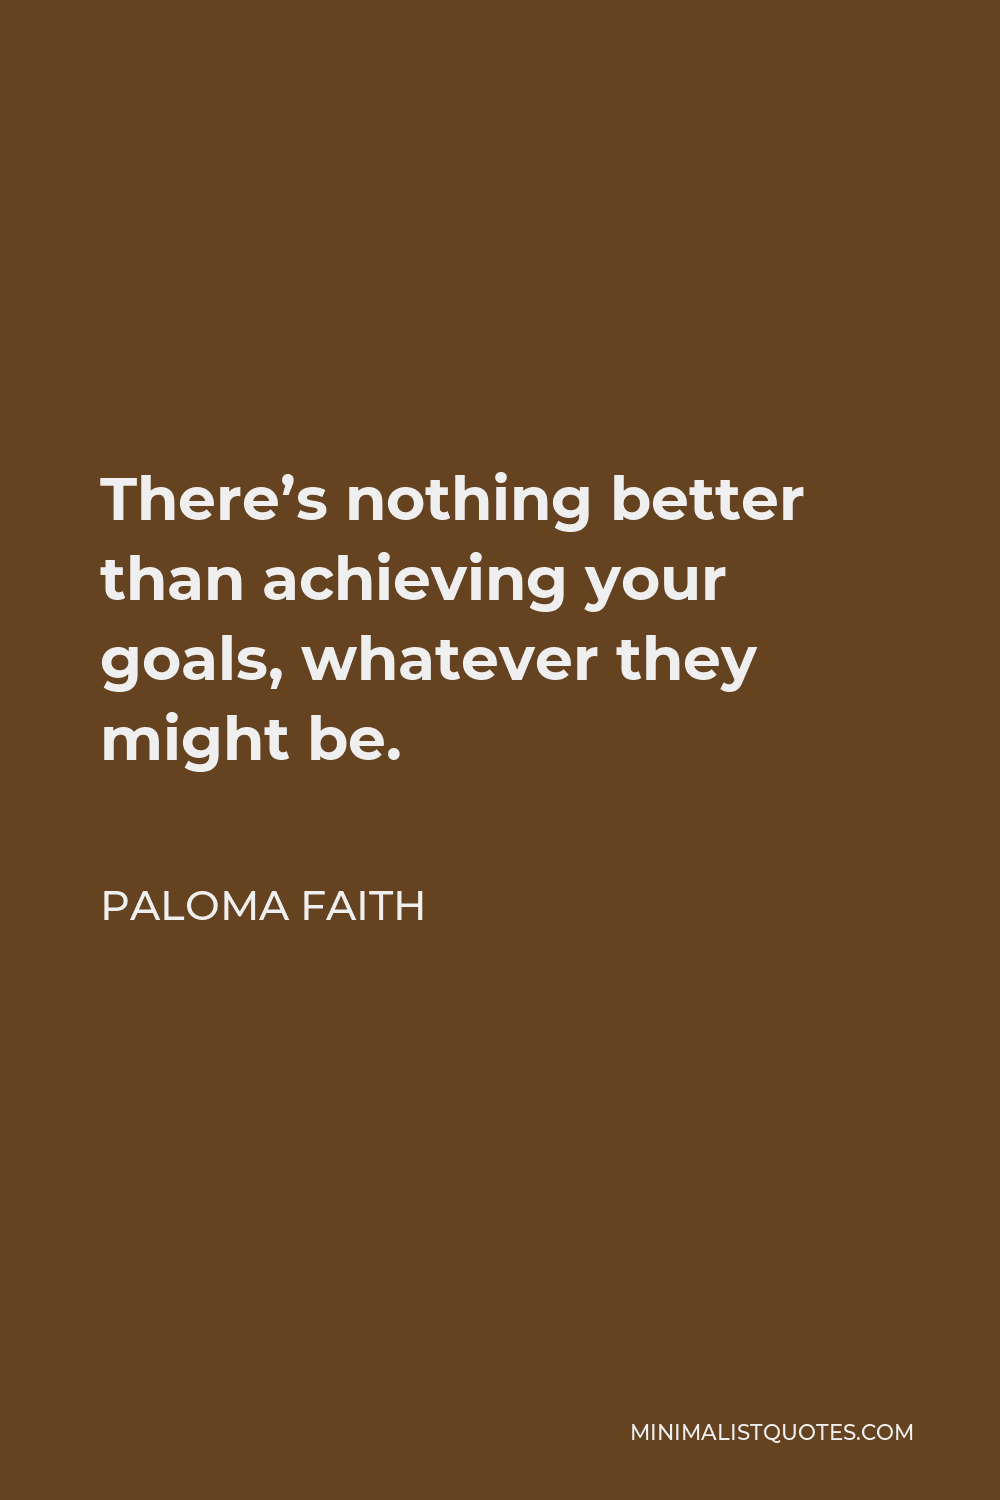 Paloma Faith Quote - There’s nothing better than achieving your goals, whatever they might be.